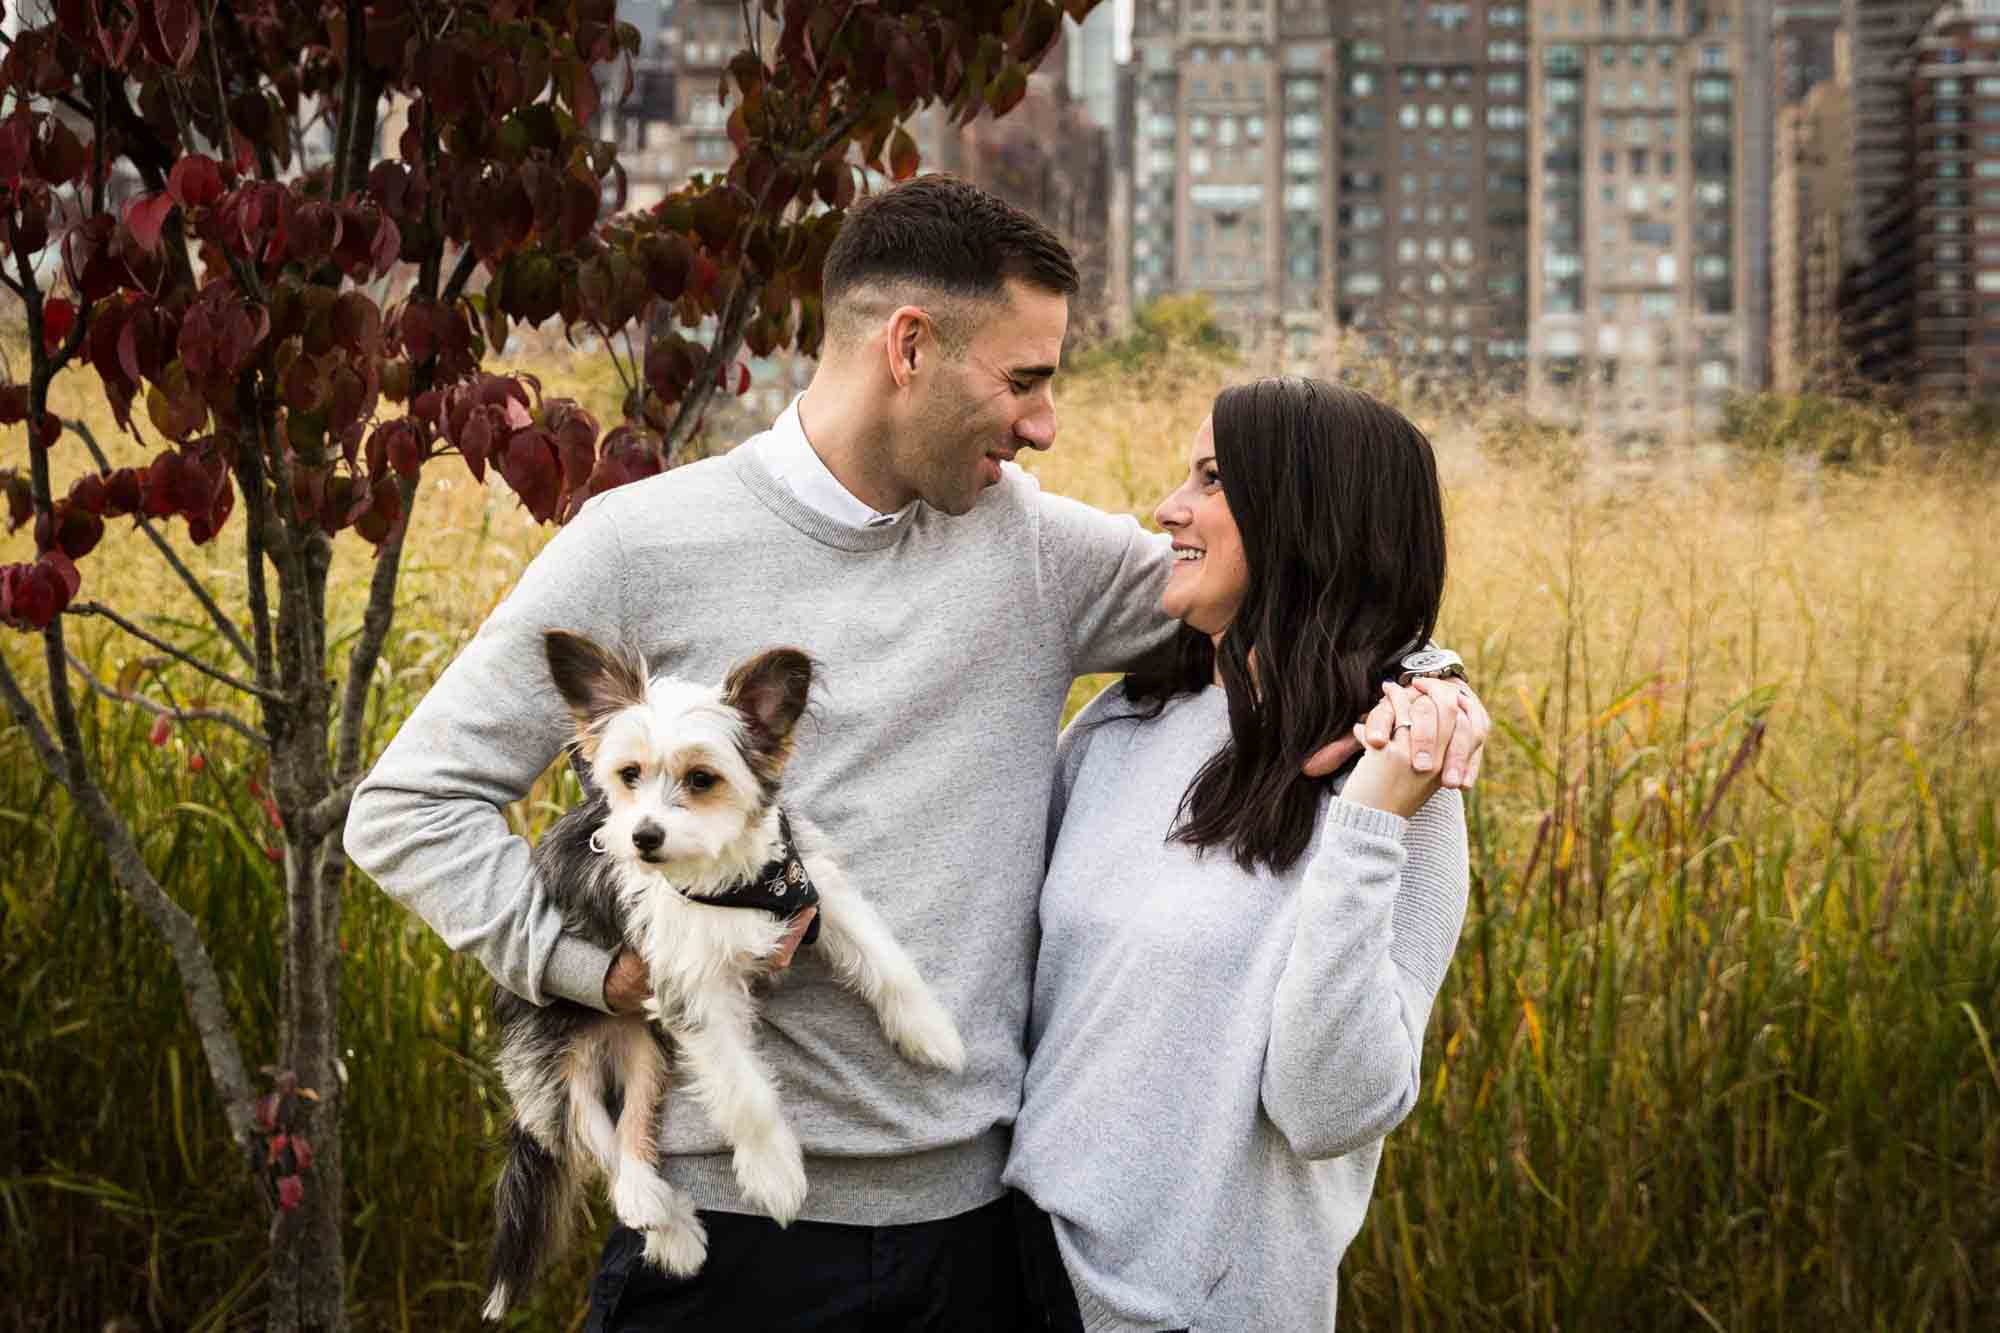 Couple hugging and holding dog for an article on pet engagement photo tips